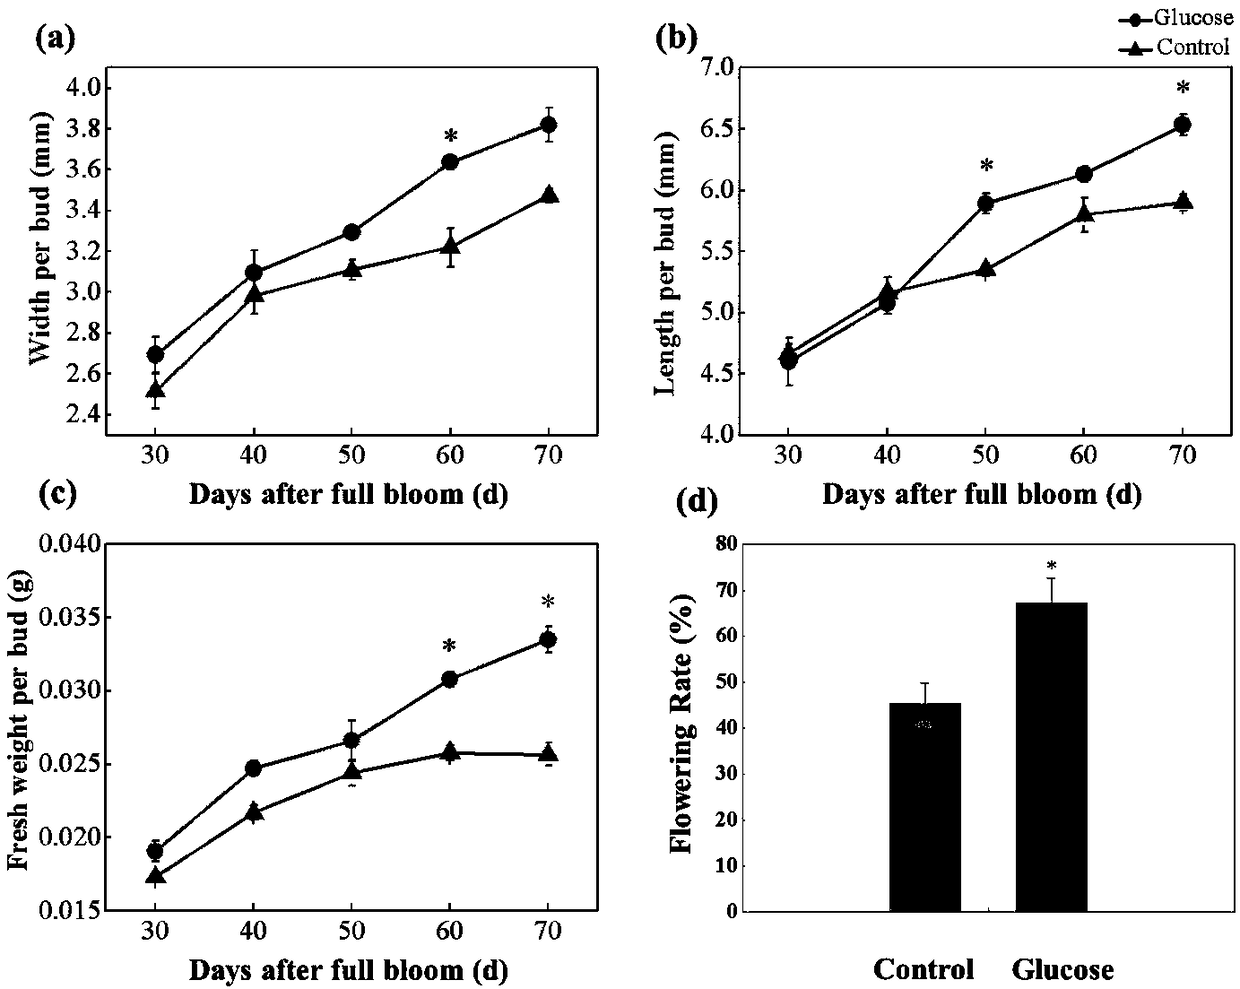 Drug for improving initiation rate of flower buds of Fuji apples and measuring method